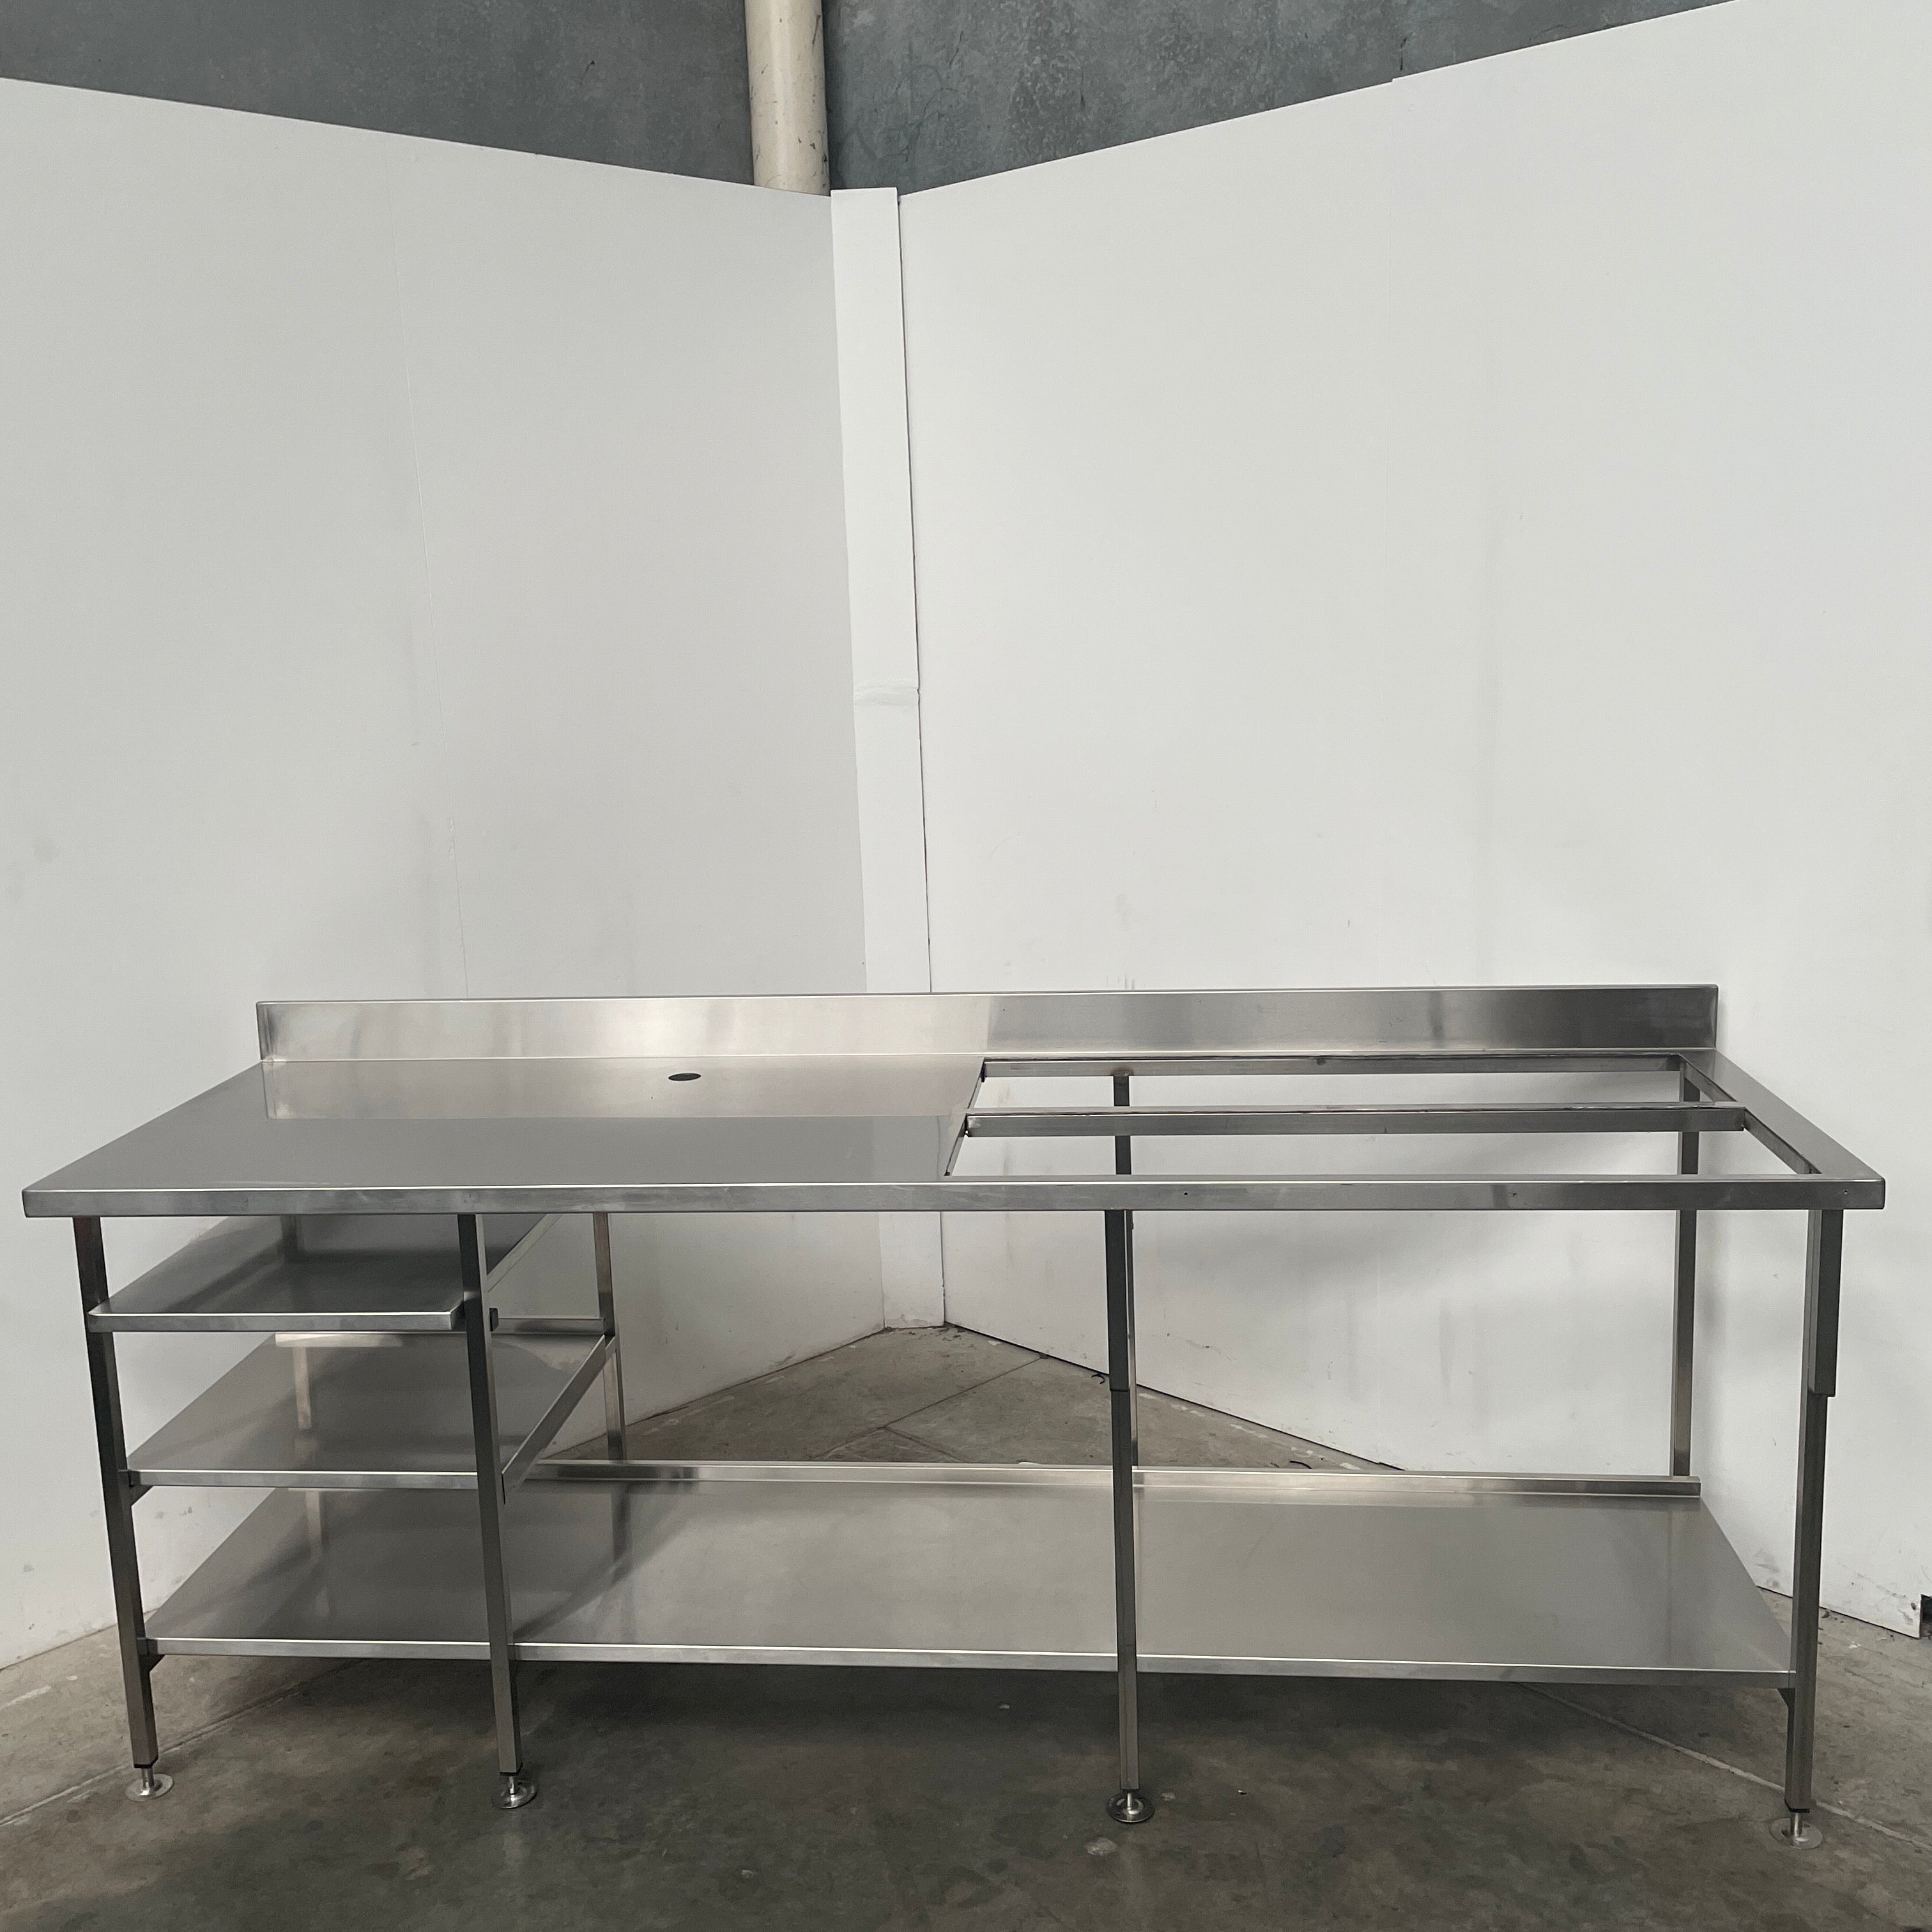 Thumbnail - Stainless Steel Bench With Splashback